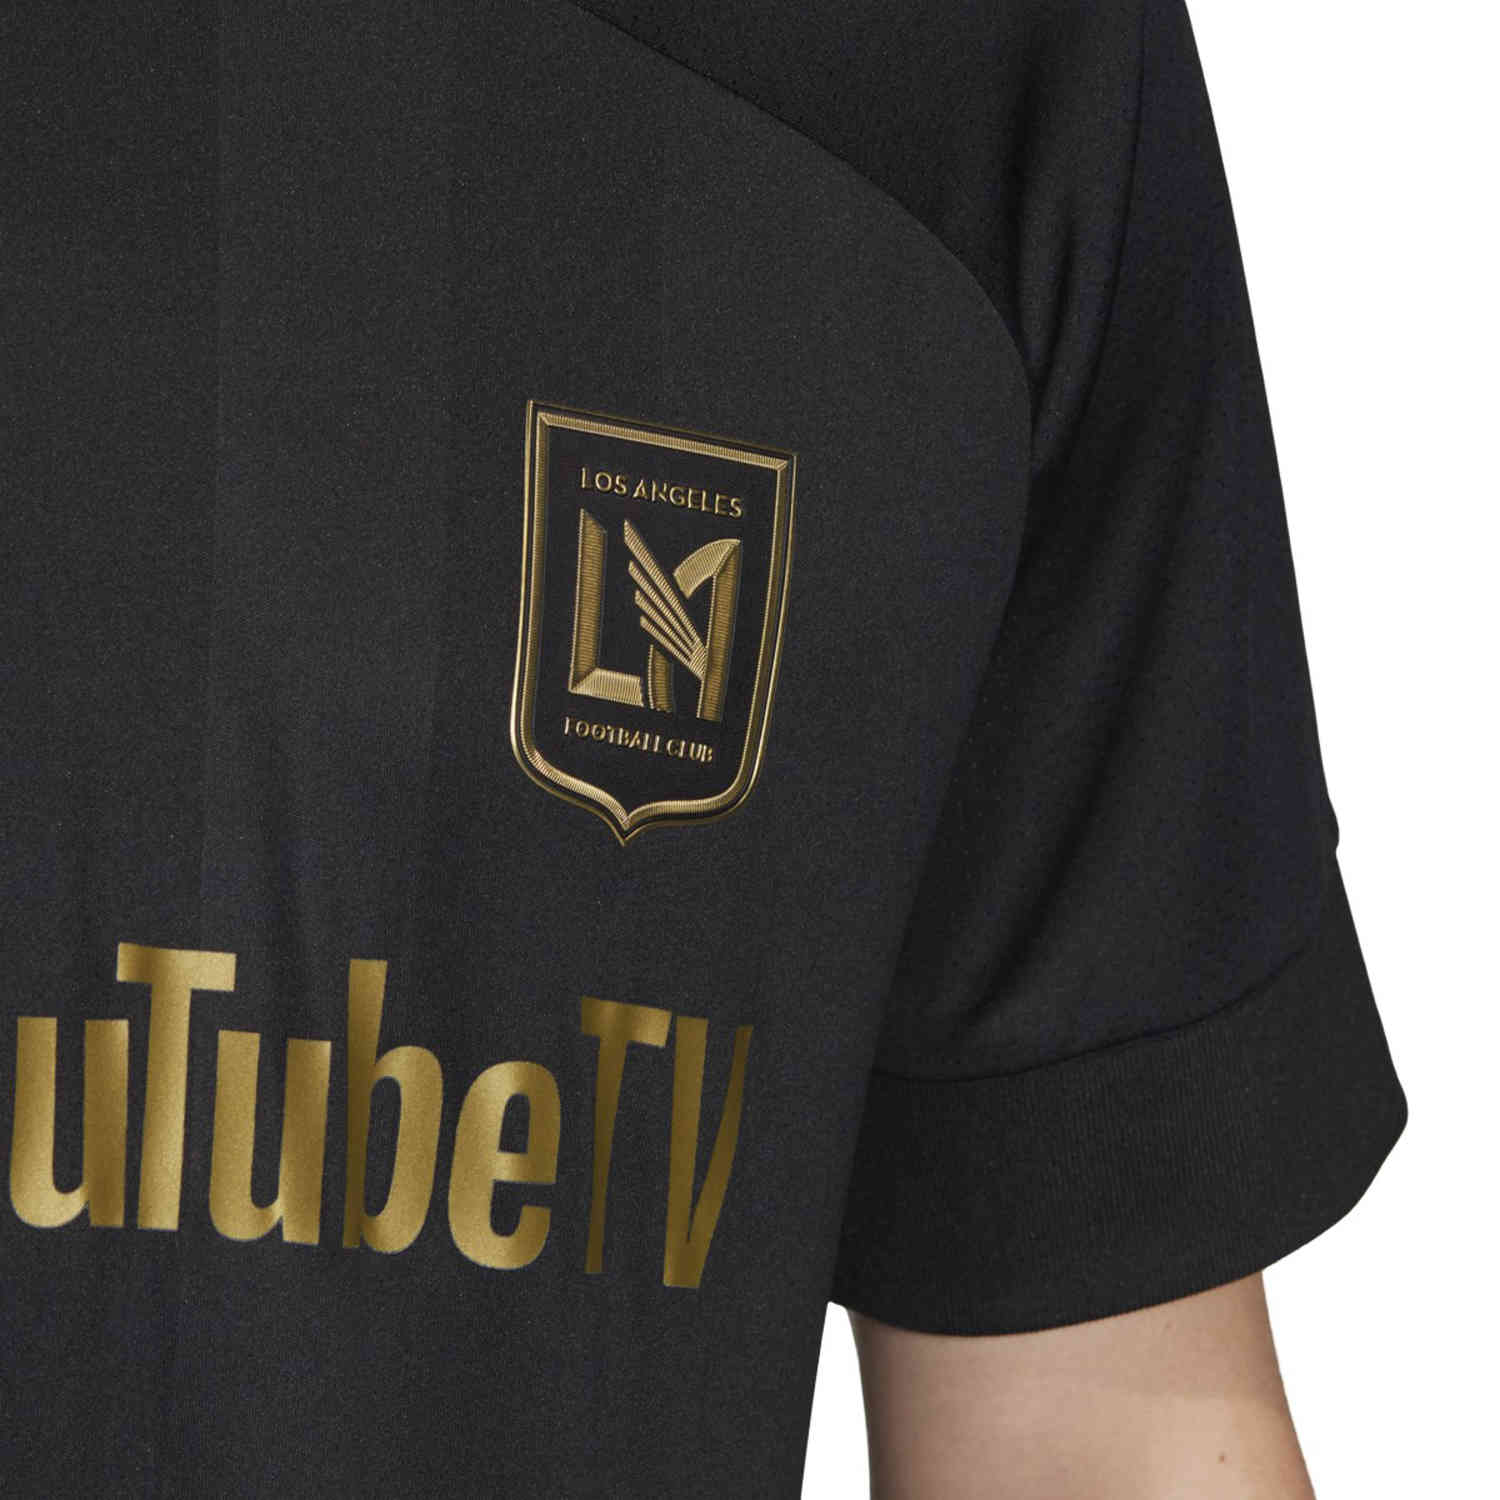 lafc jersey authentic